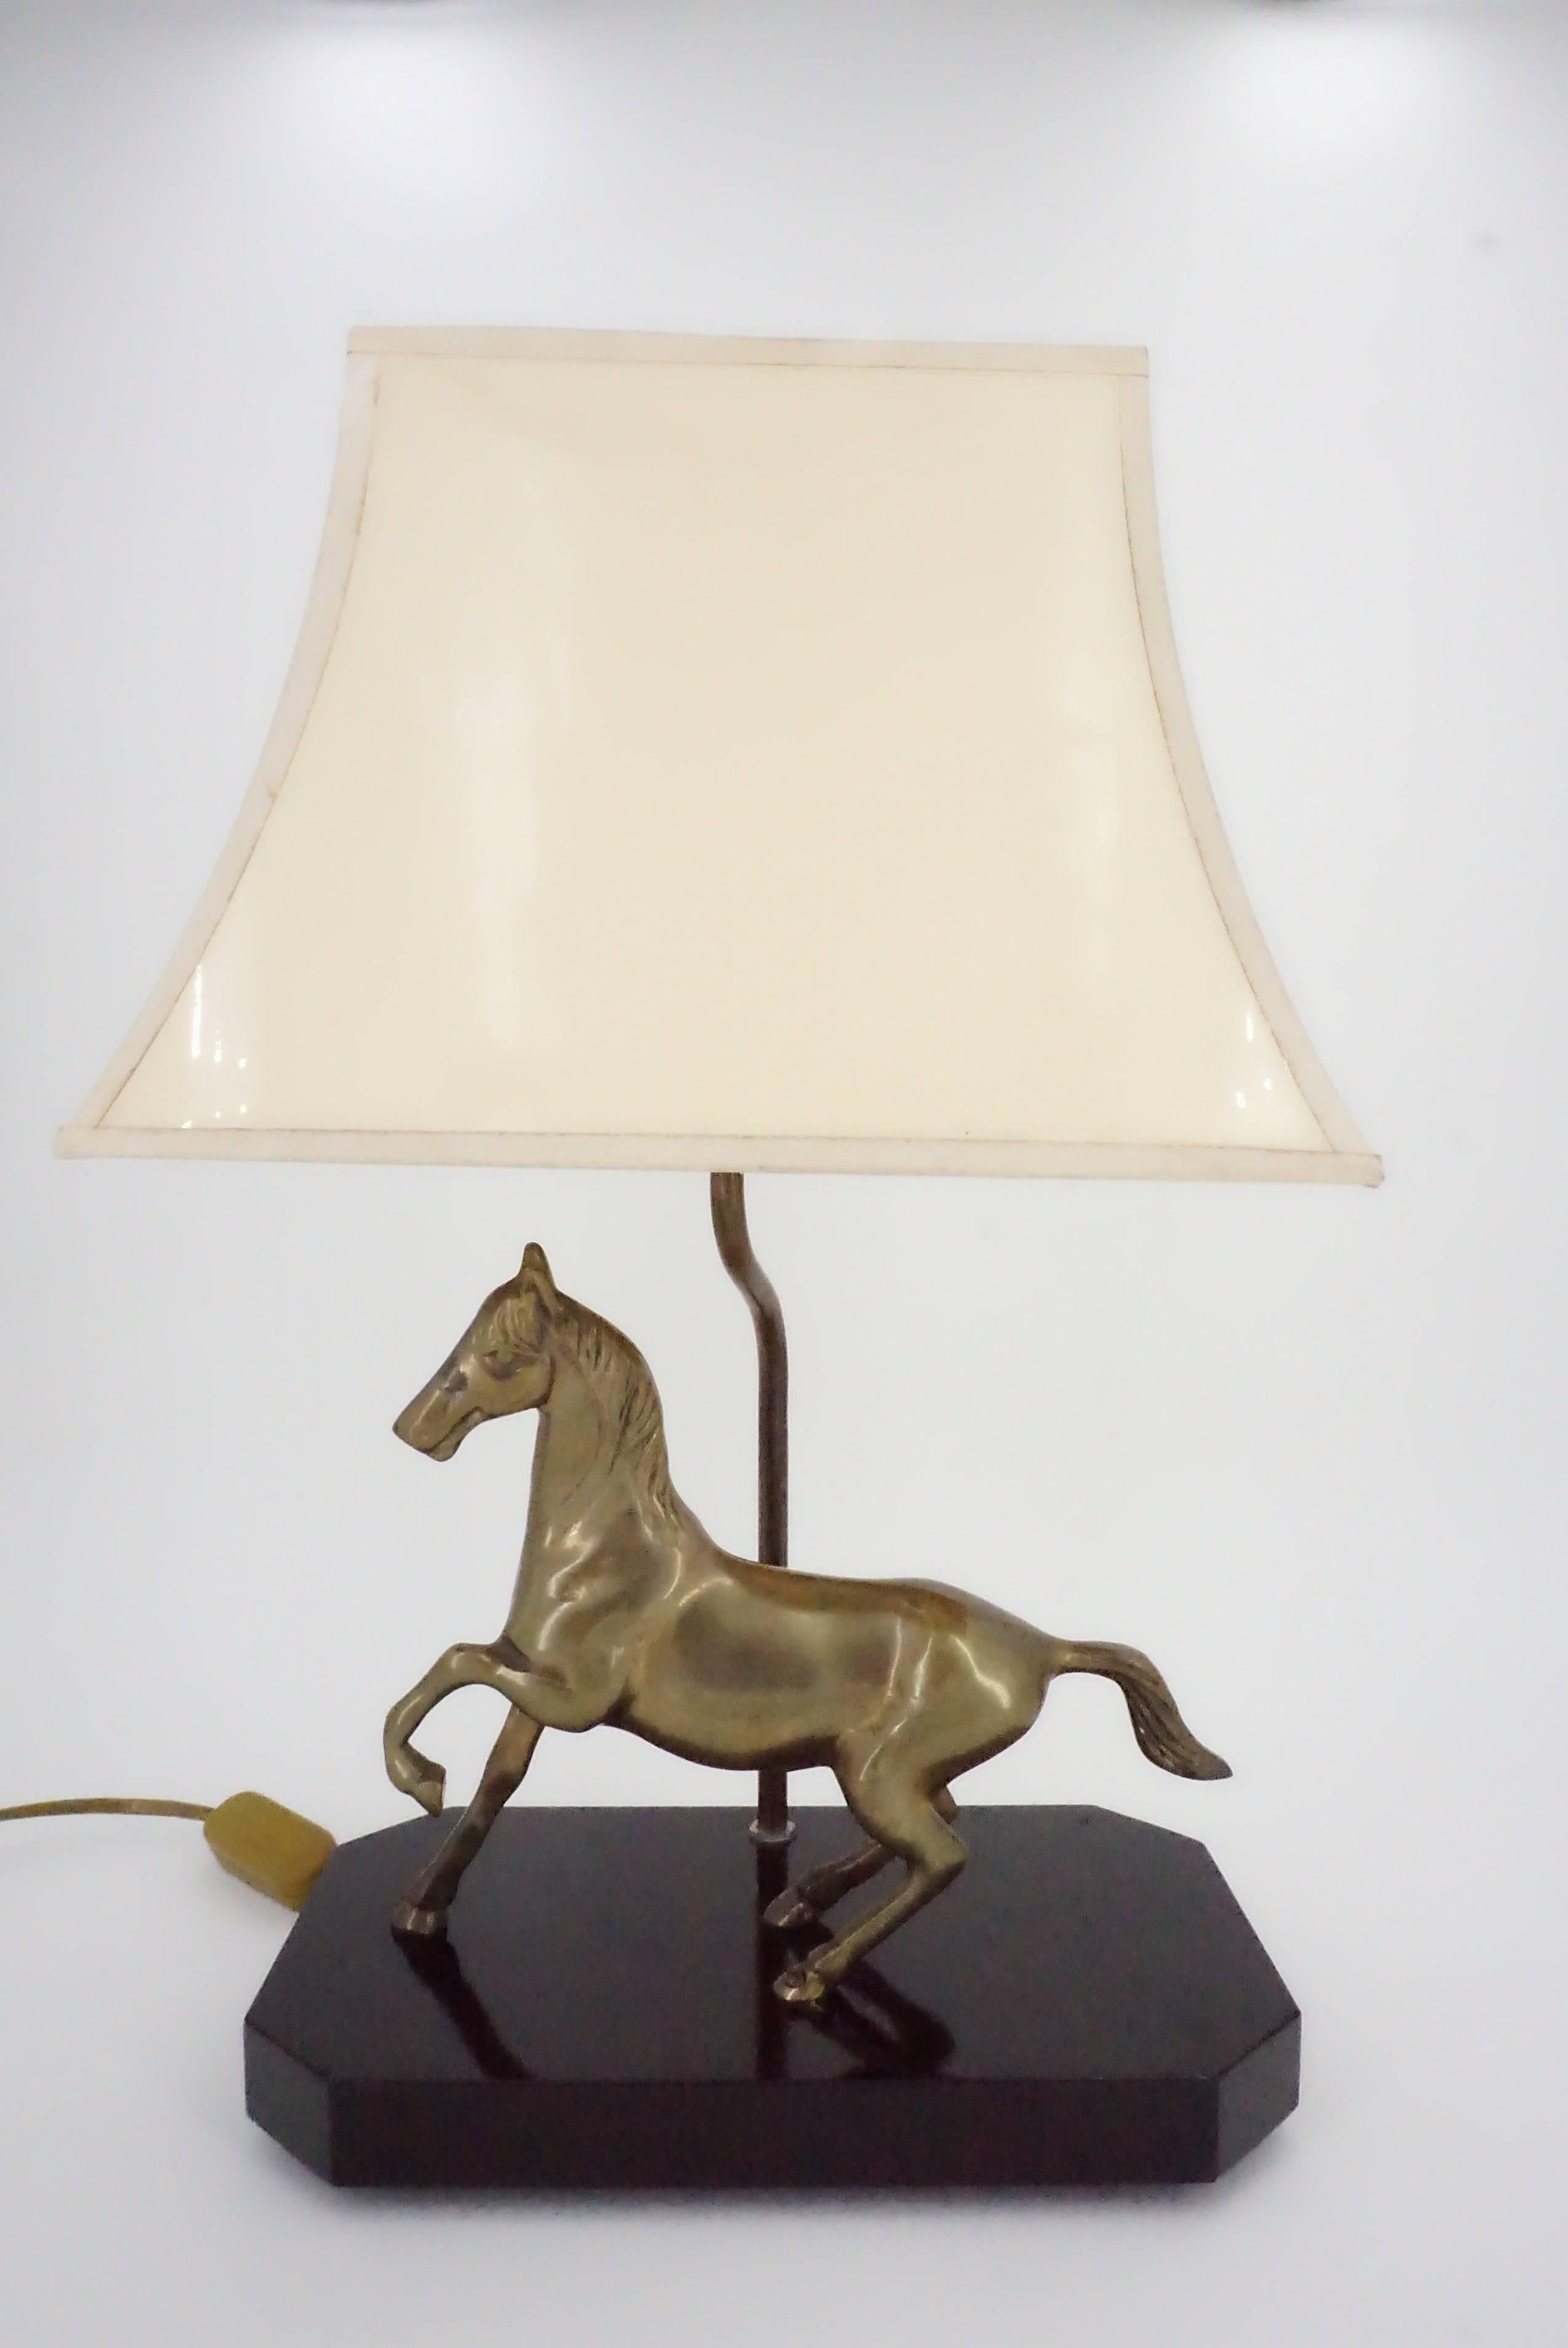 Lamp on hexagonal base in black lacquered wood, depicting a moving brass horse, adorned with an ivory and gold-colored pagoda lampshade inside, worthy of Maison Jansens and Charles ...